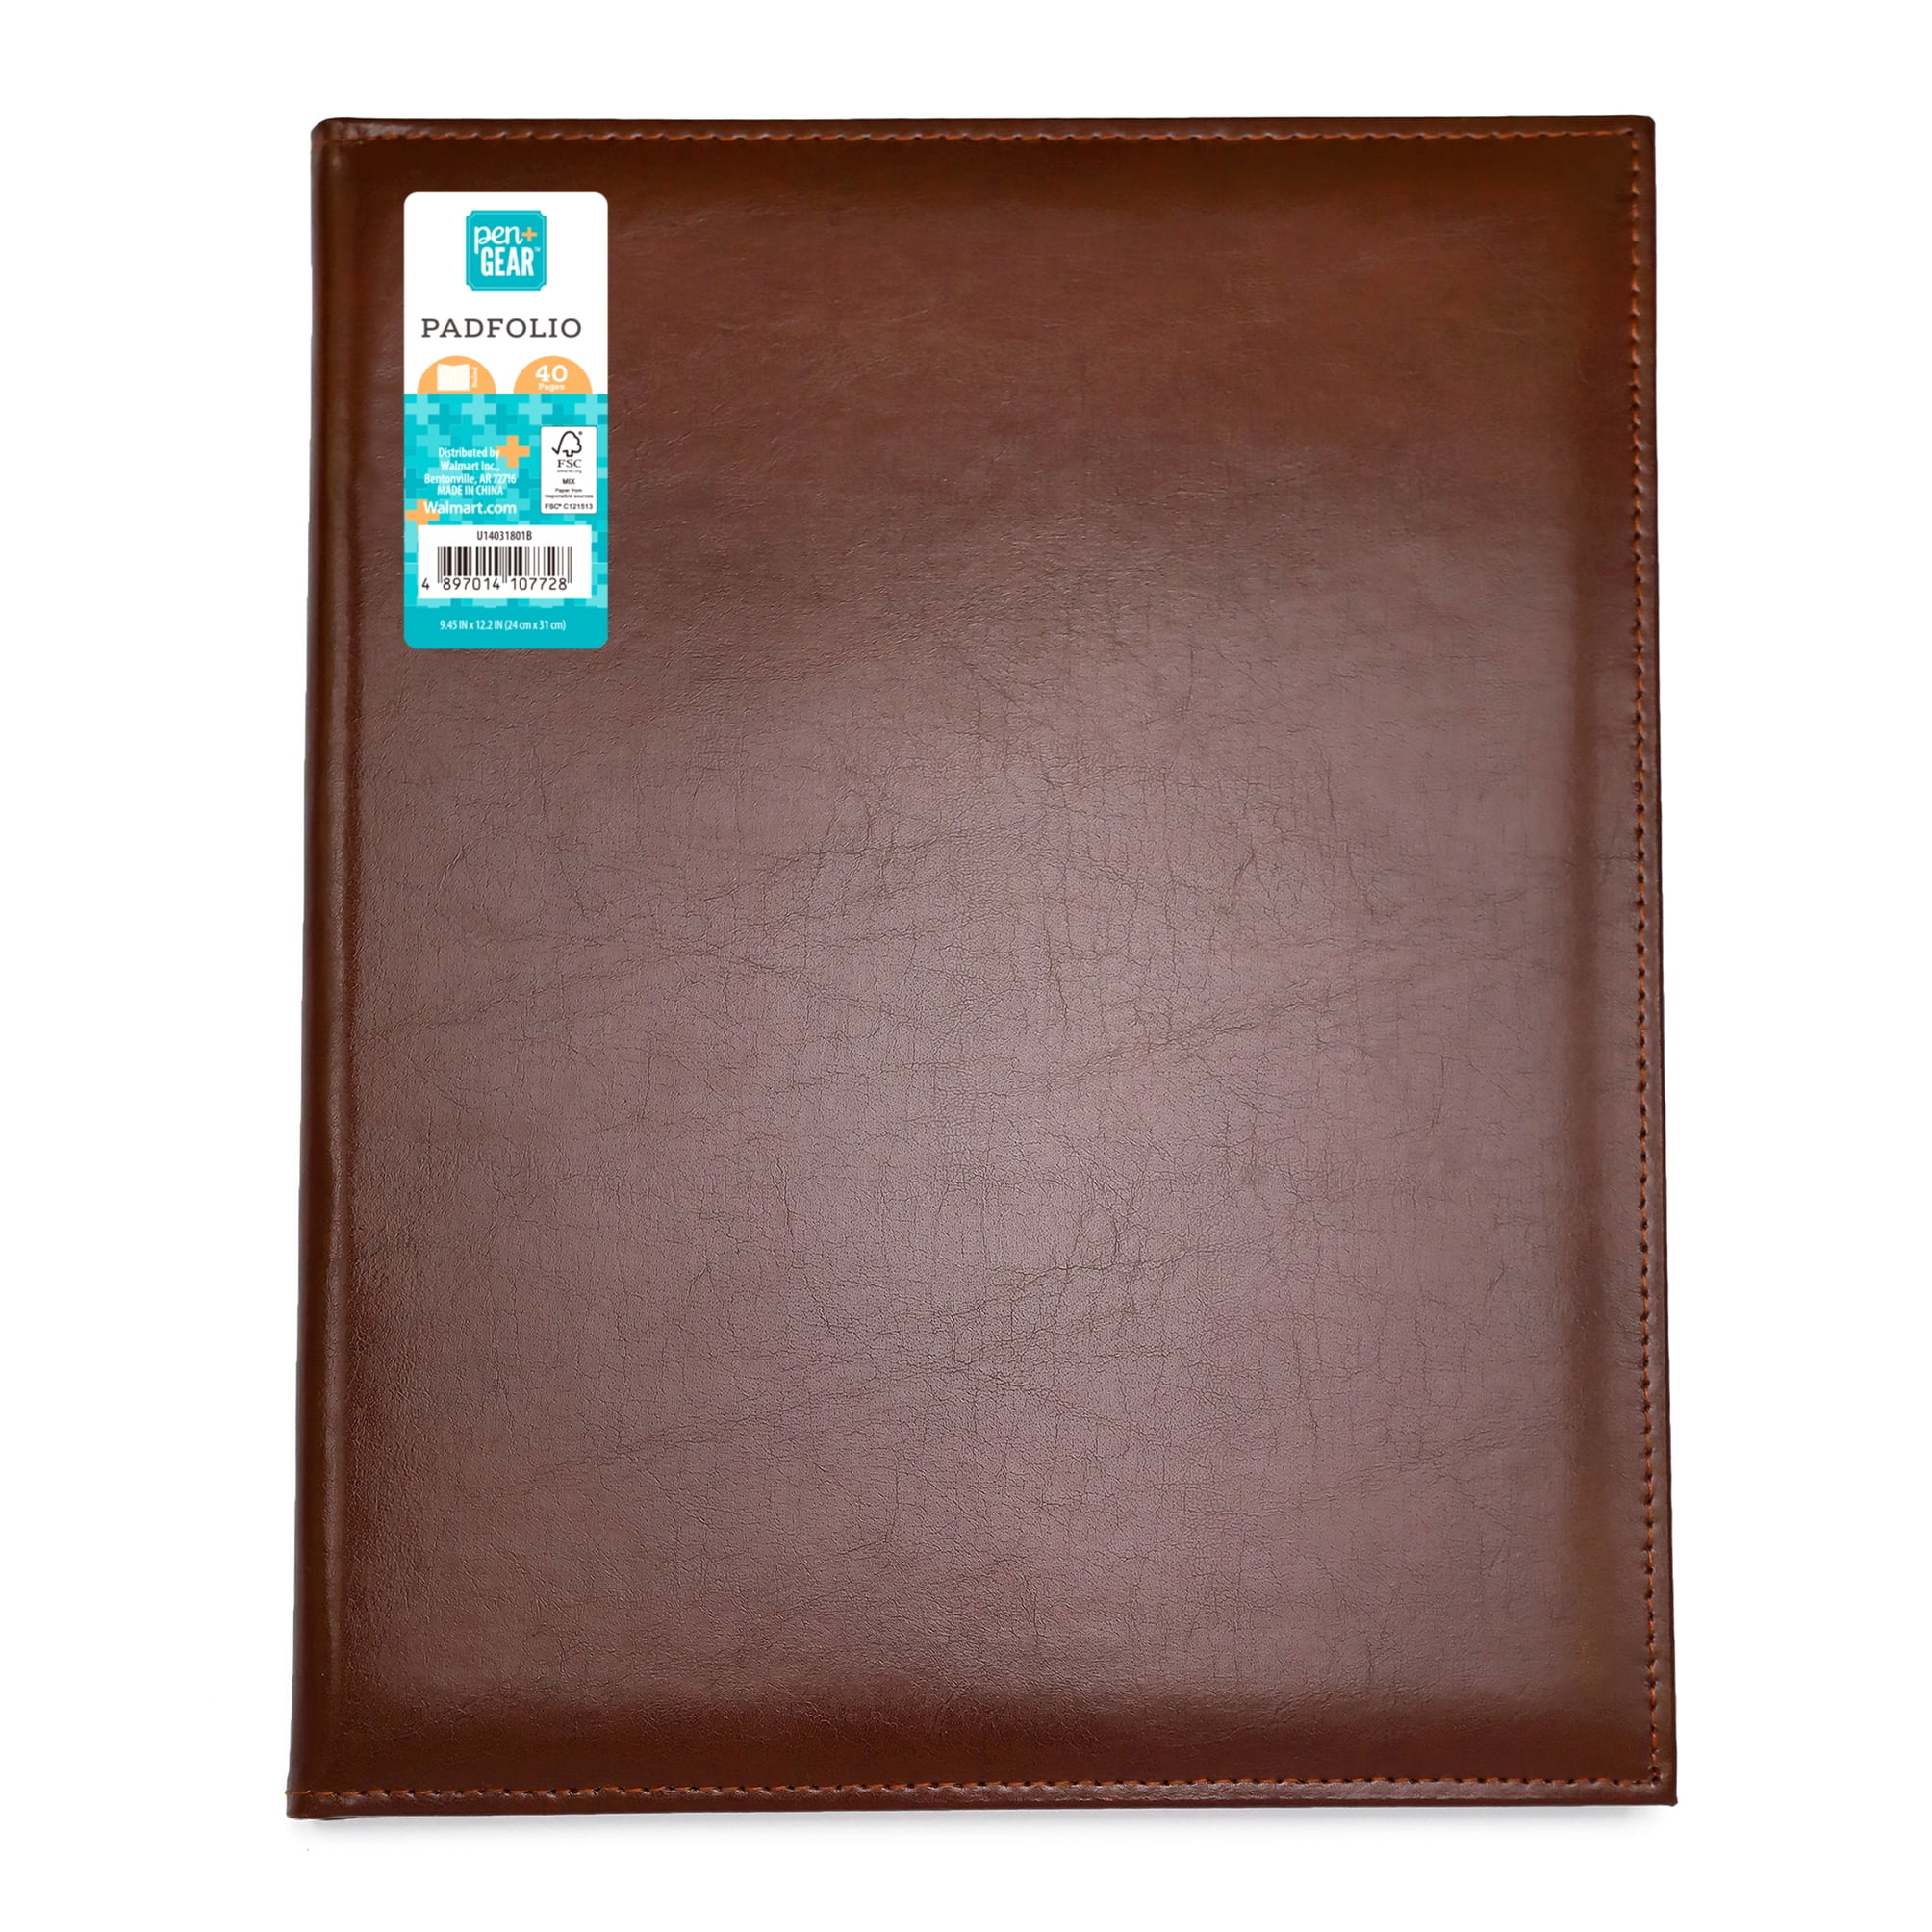 Pen + Gear Bonded Leather Padfolio, Dark Brown Color, 9.5" x 12.25", Writing Pad Included